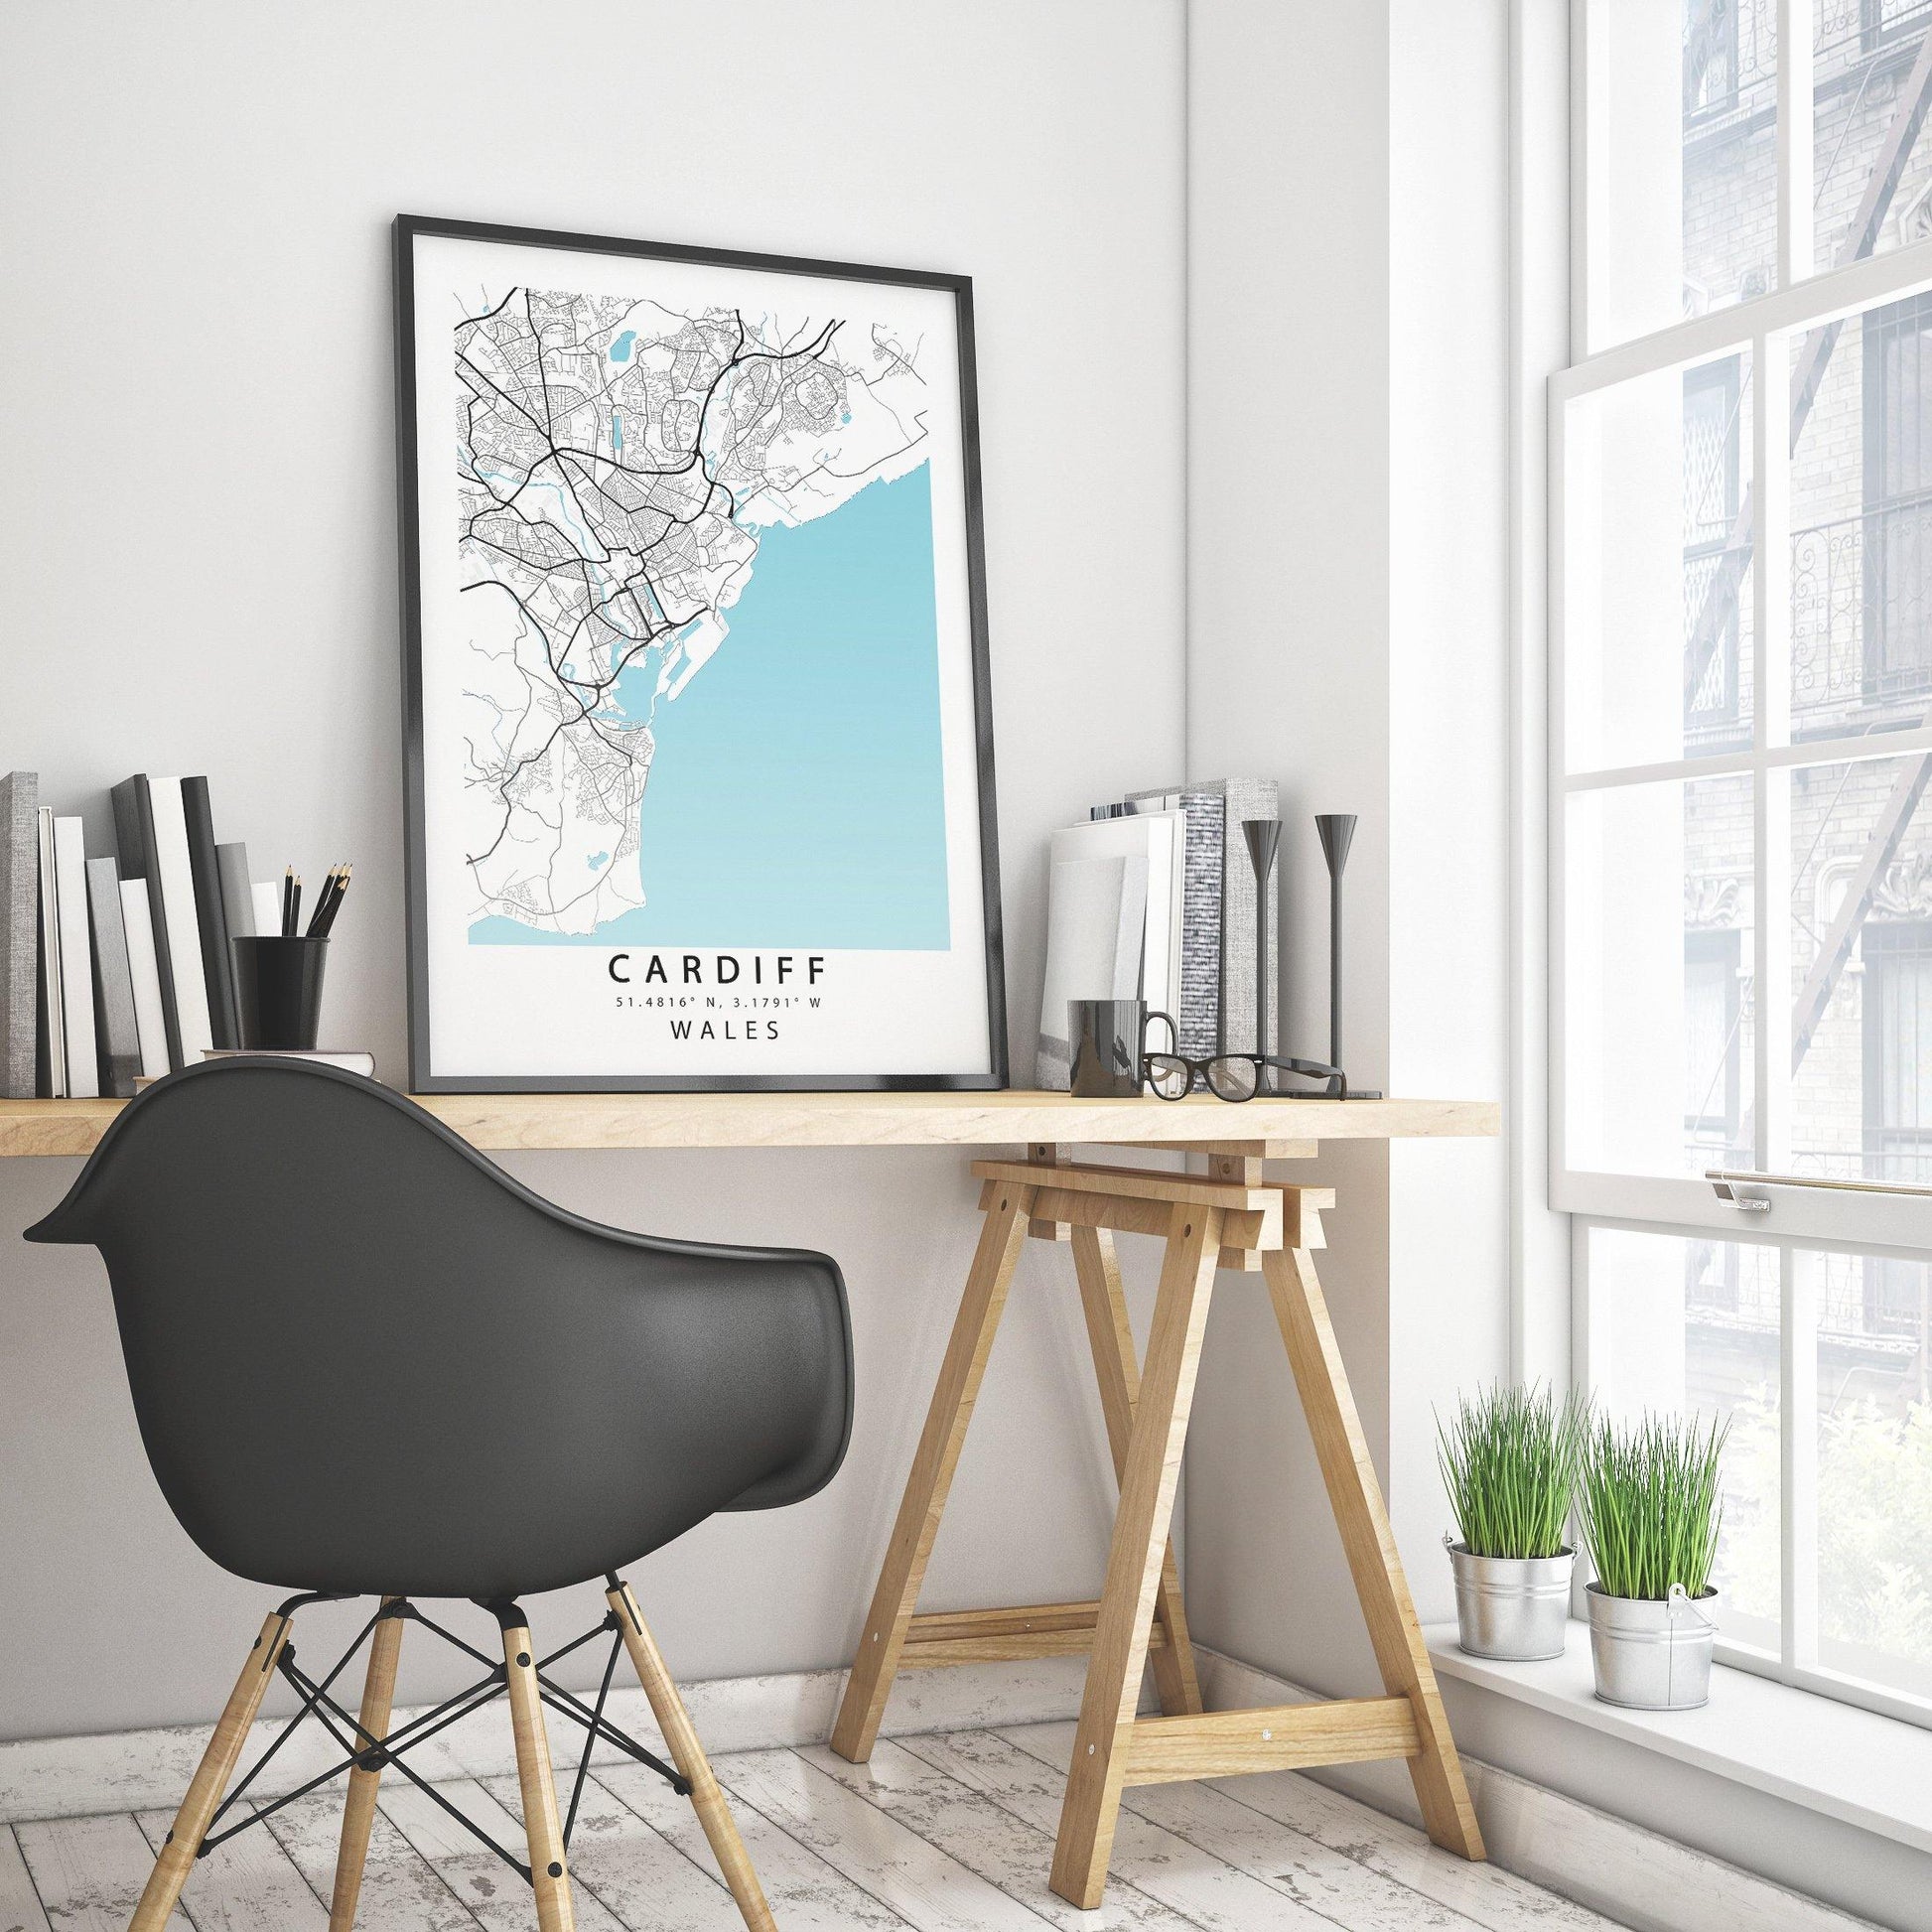 CARDIFF Map Print | Cardiff Street City Road | BRITAIN Poster Art | Cardiff Wall Art  | Variety Sizes - 98types